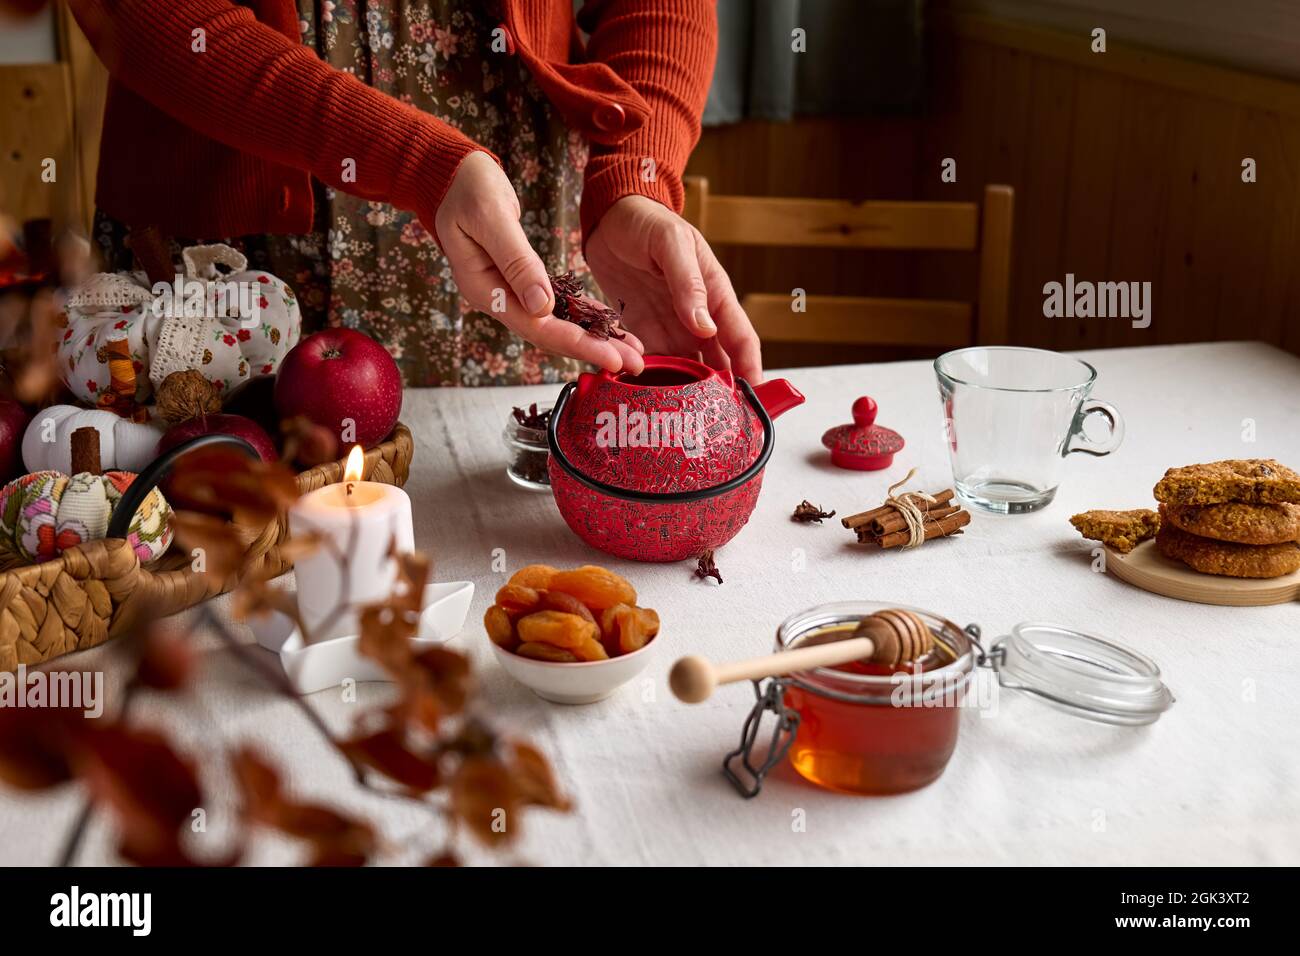 Cozy autumn days. Woman wearing orange sweater brew tea in red teapot on the table with linen tablecloth. Aromatic mood. Fall vibes. Tea drinking.Than Stock Photo